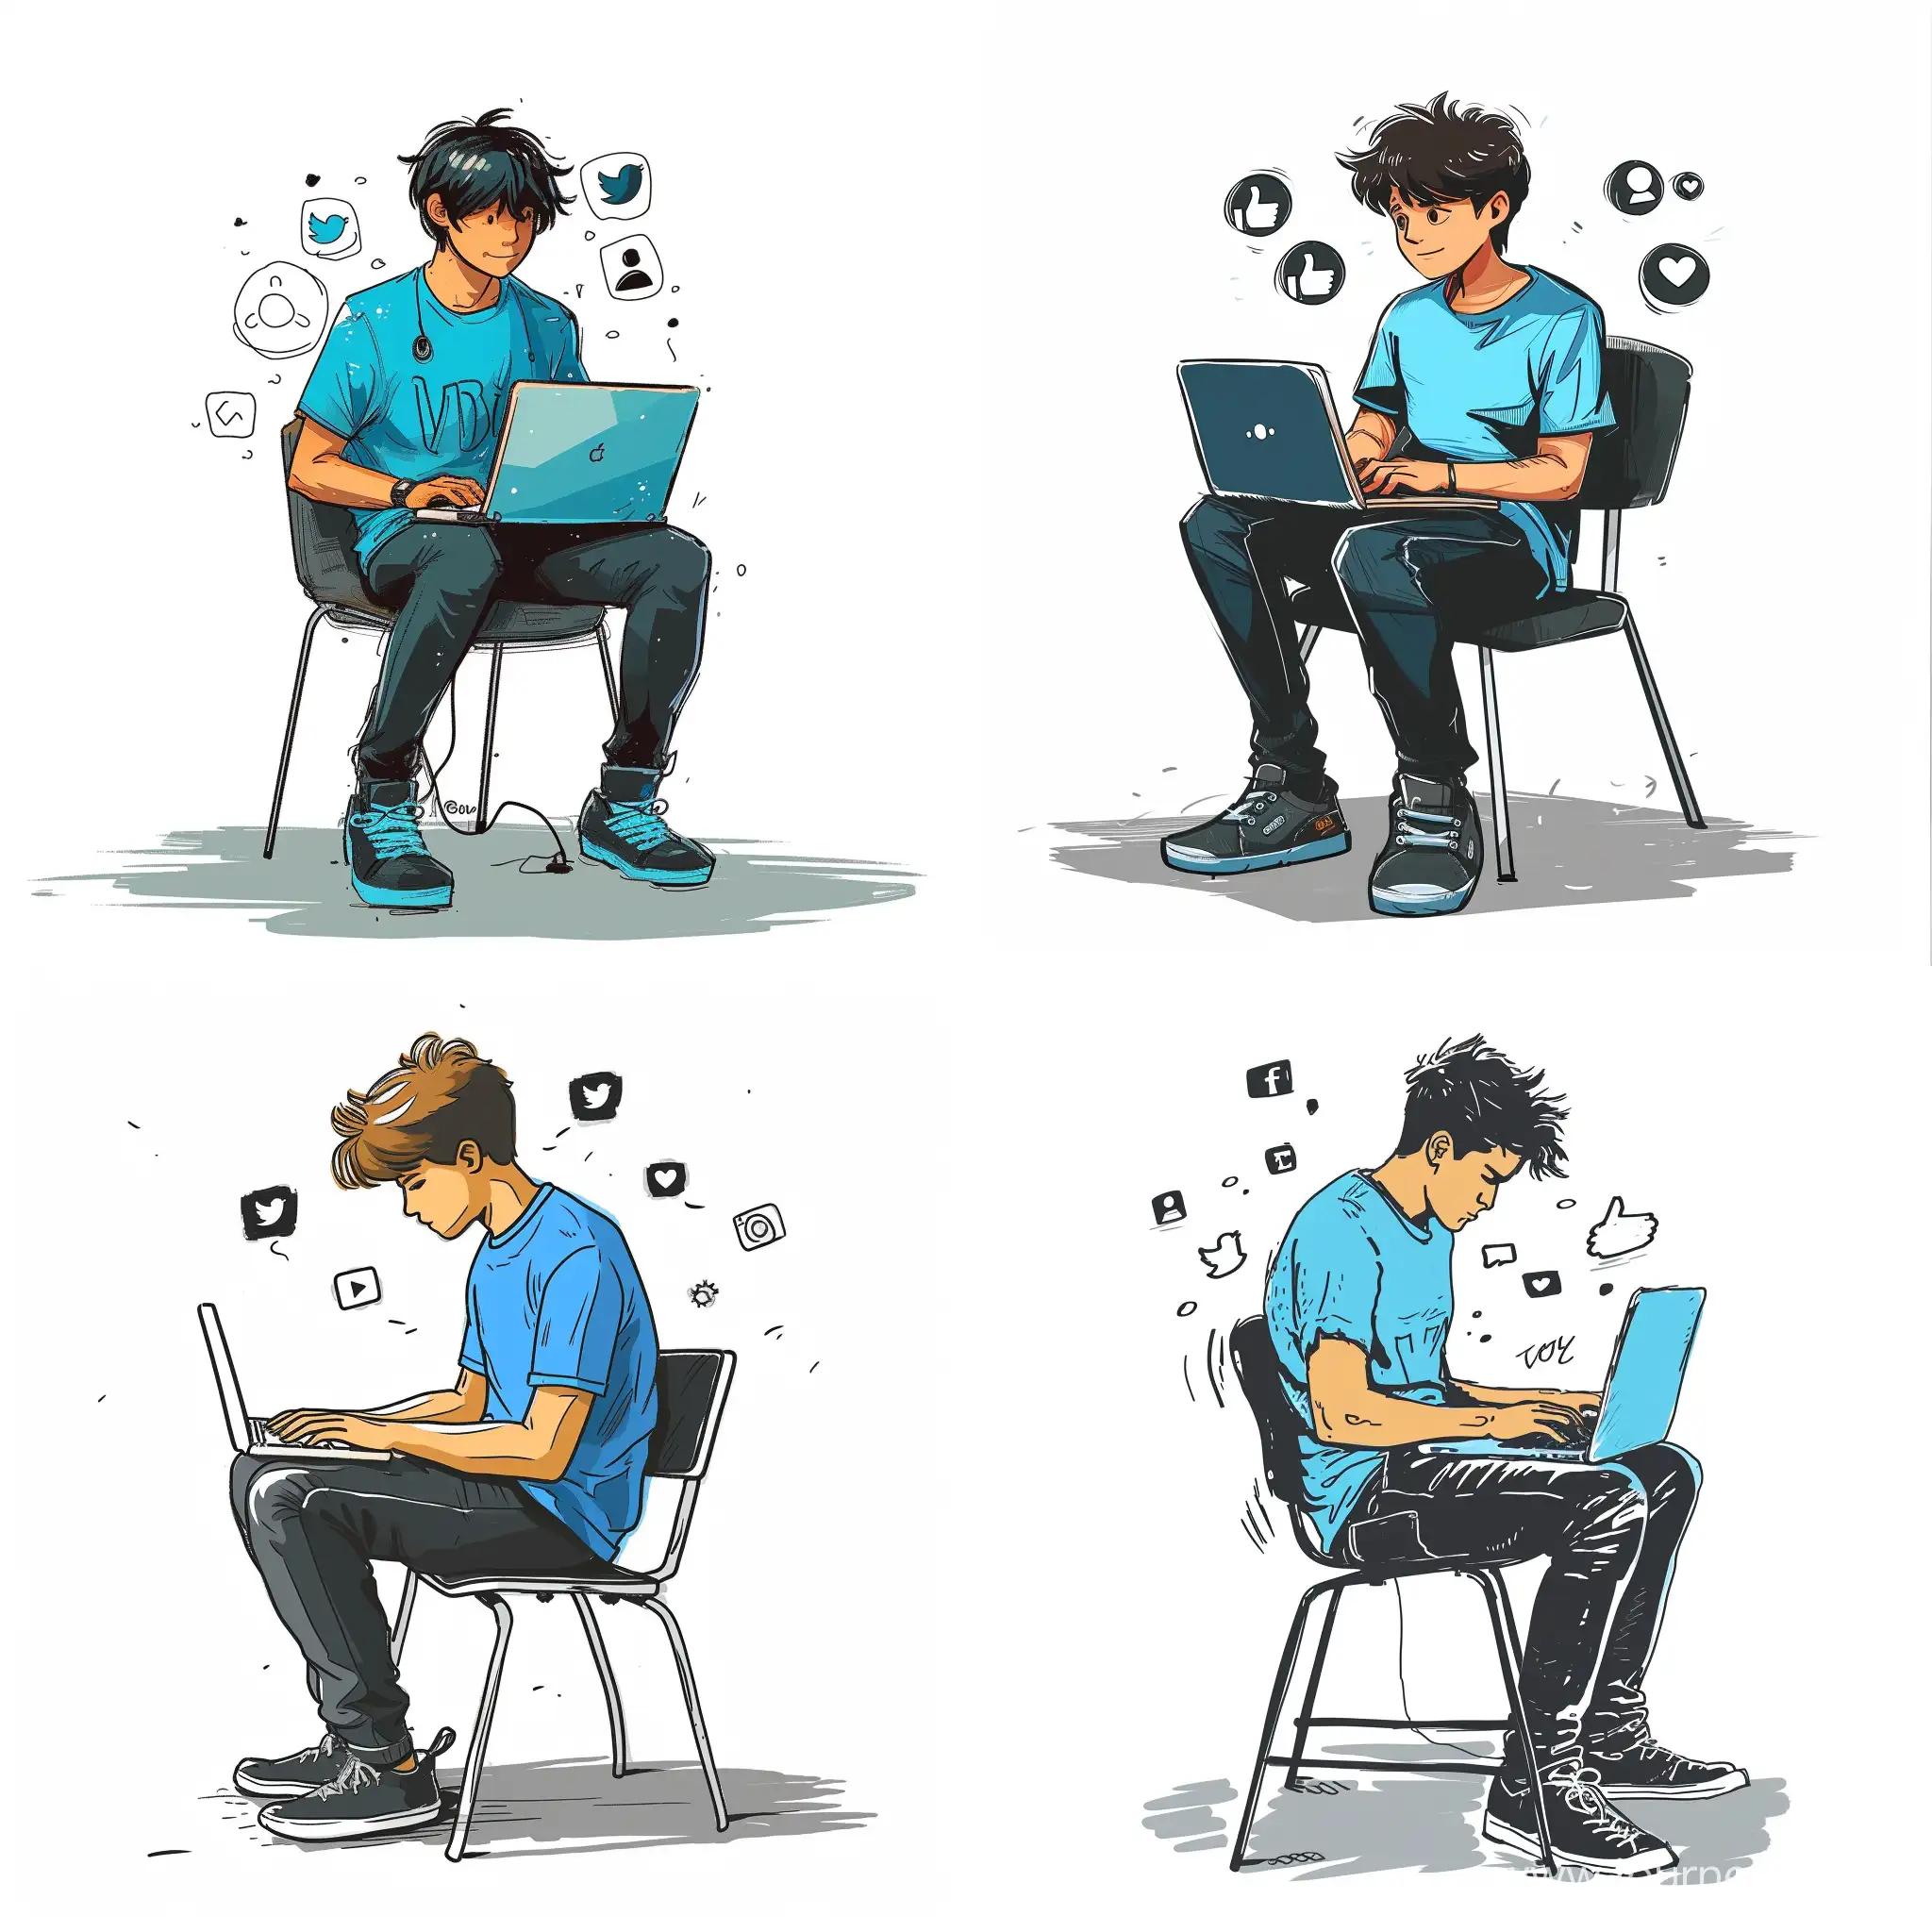 Creative-Programmer-Illustration-Young-Man-in-Blue-Tshirt-at-Laptop-with-Social-Media-Icons